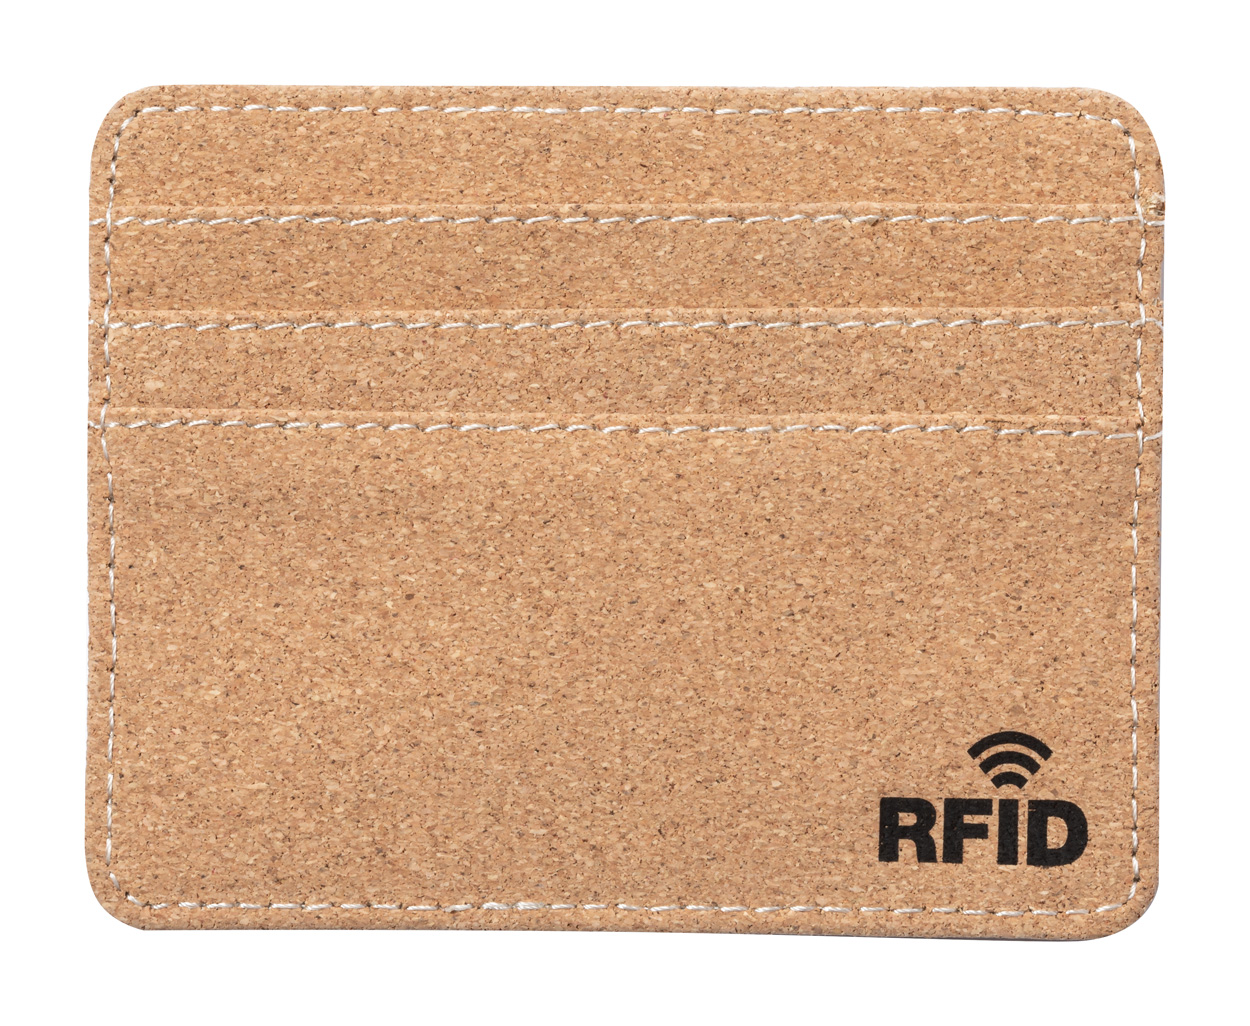 Reylox cover for credit cards - beige